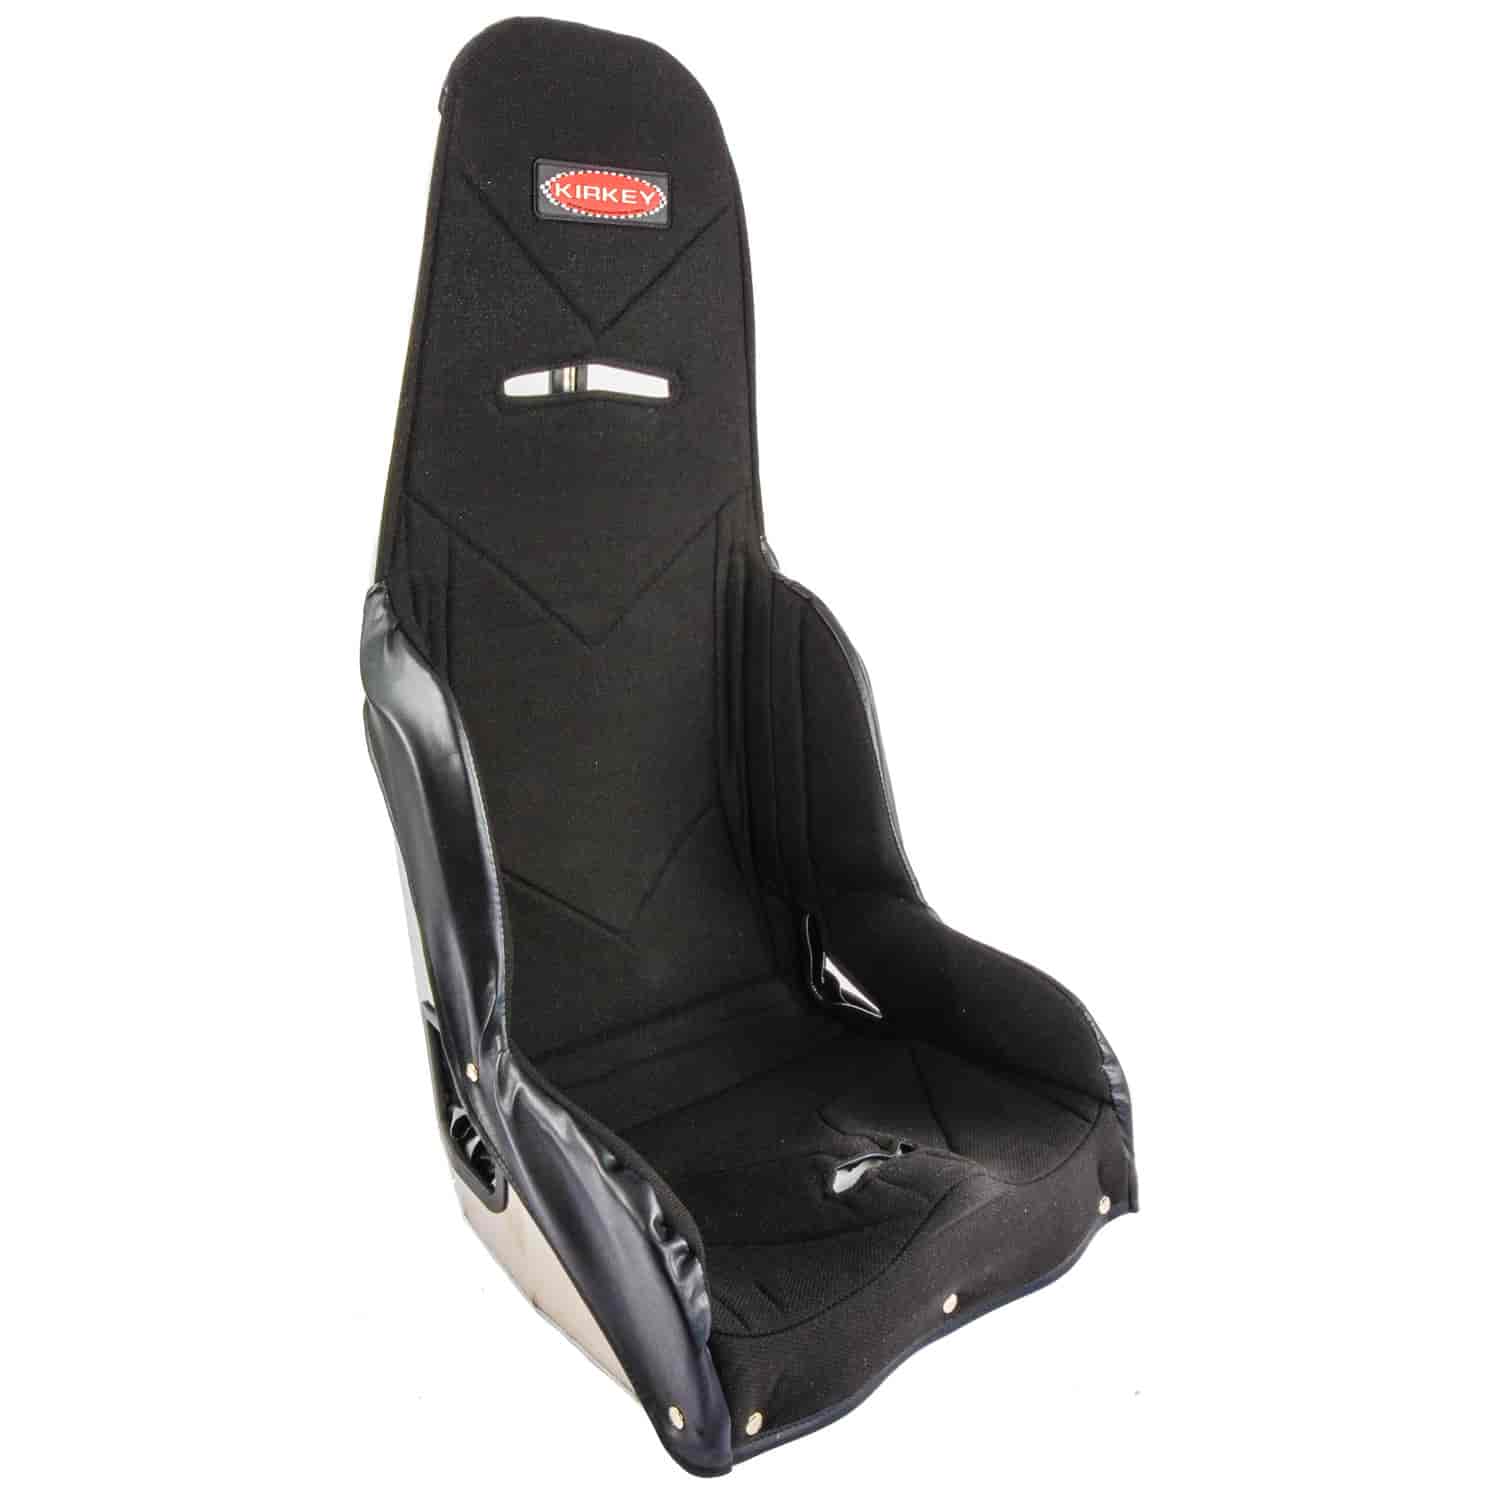 Pro Street Drag Seat Cover 18" Hip Width